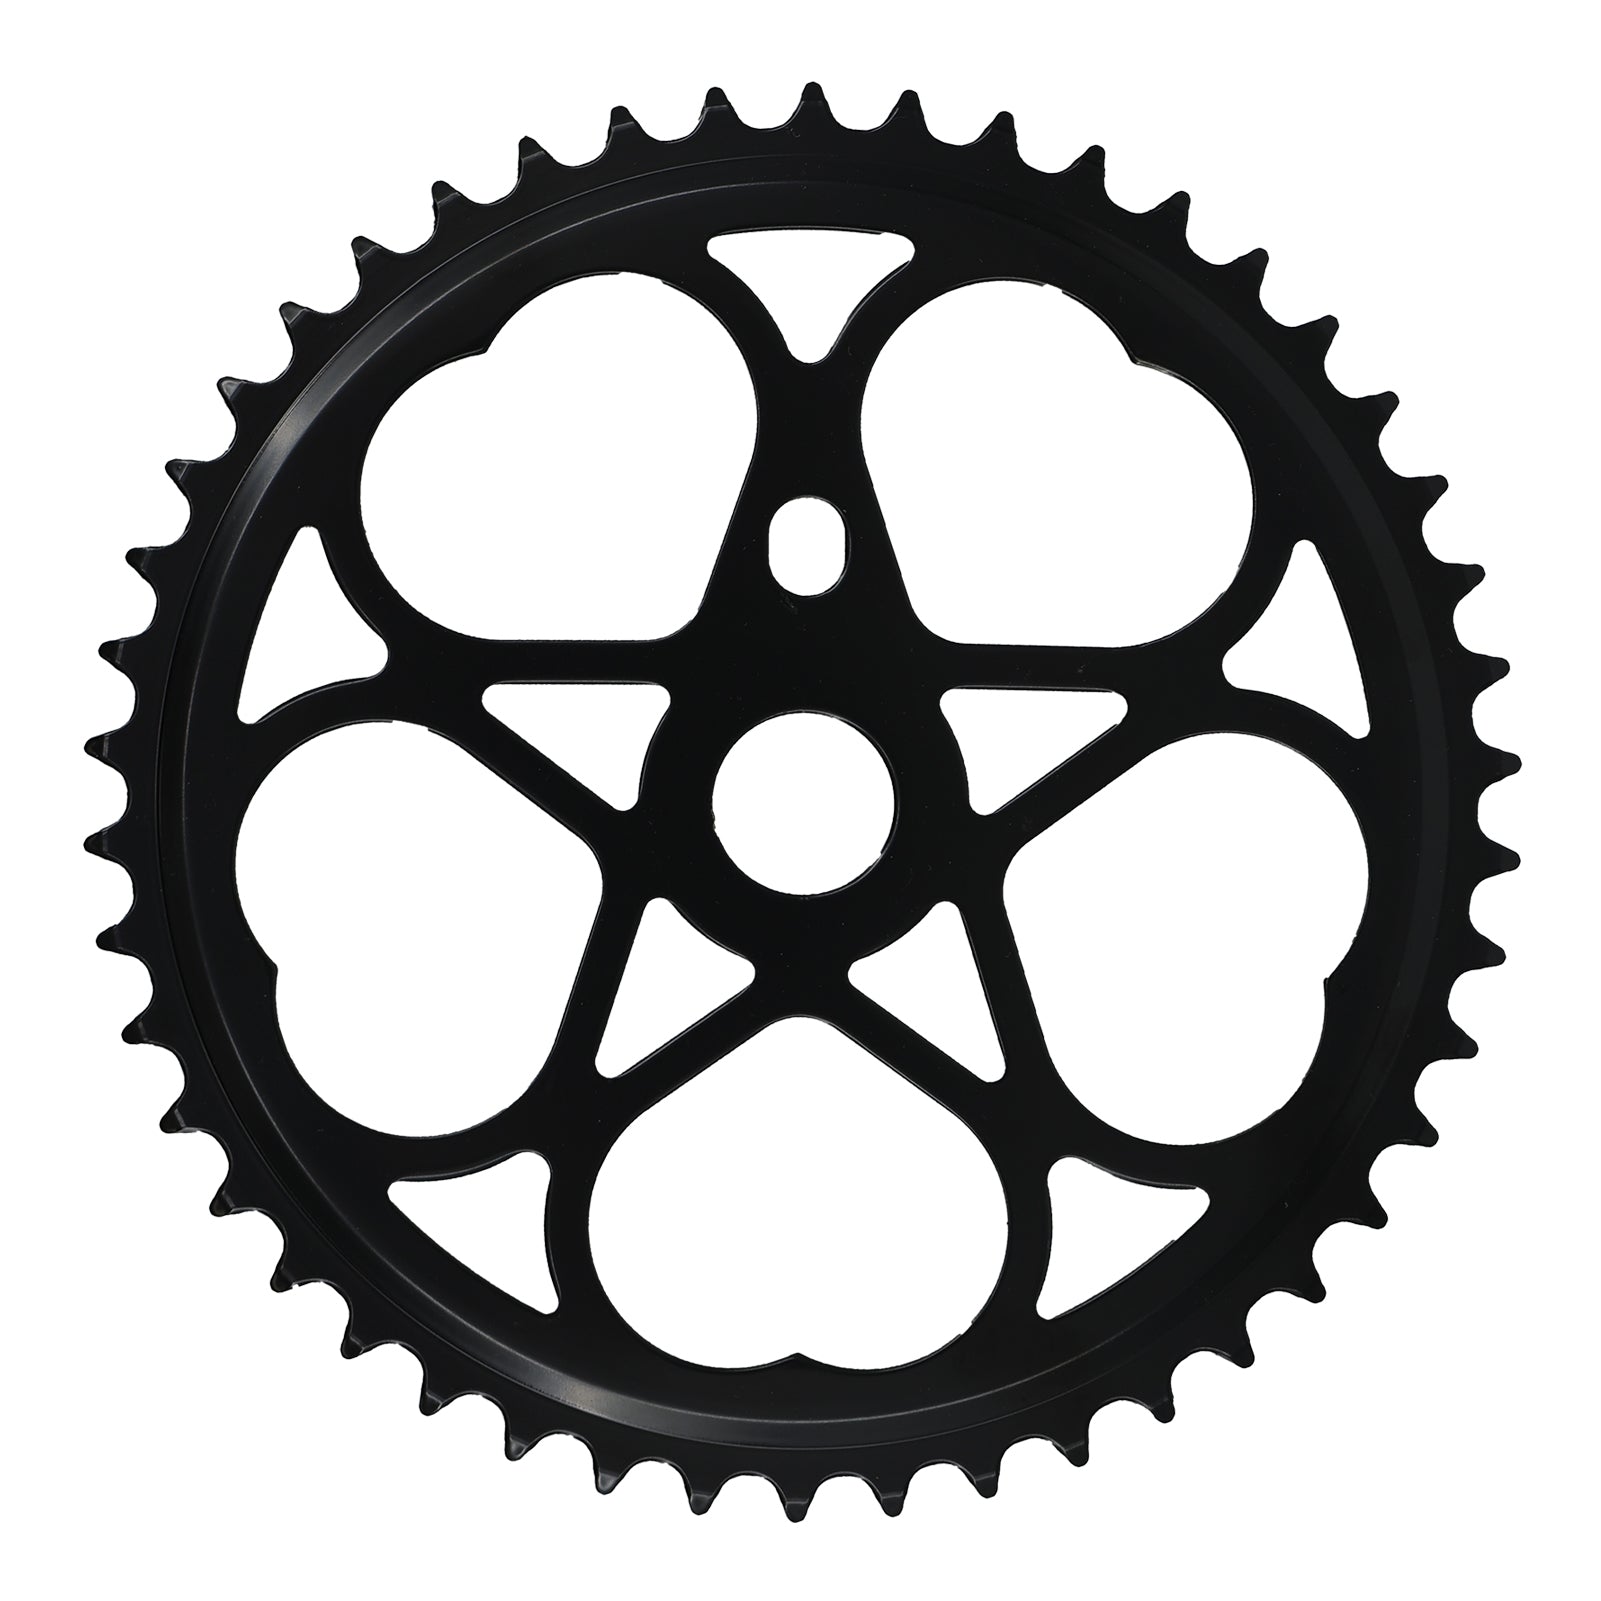 Tracer GS Series Chainwheels Single Speed multiple shape and Chrome/Black available